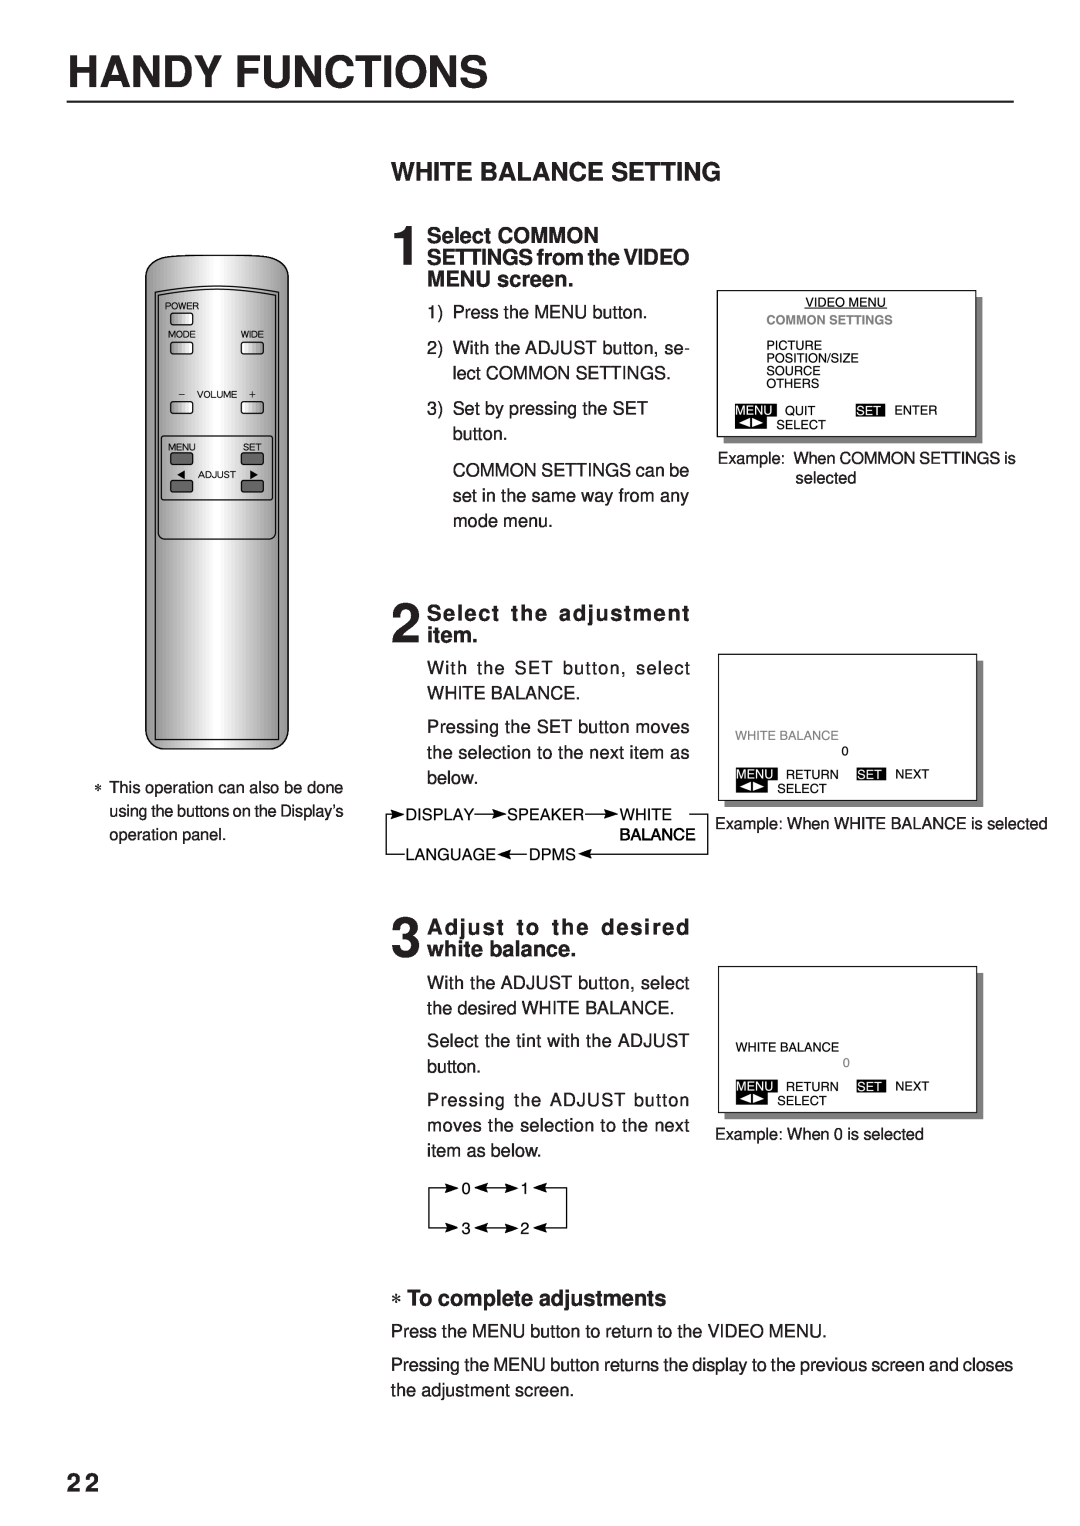 Fujitsu PDS4203W-H / PDS4203E-H user manual White Balance Setting, Adjust to the desired white balance, Handy Functions 